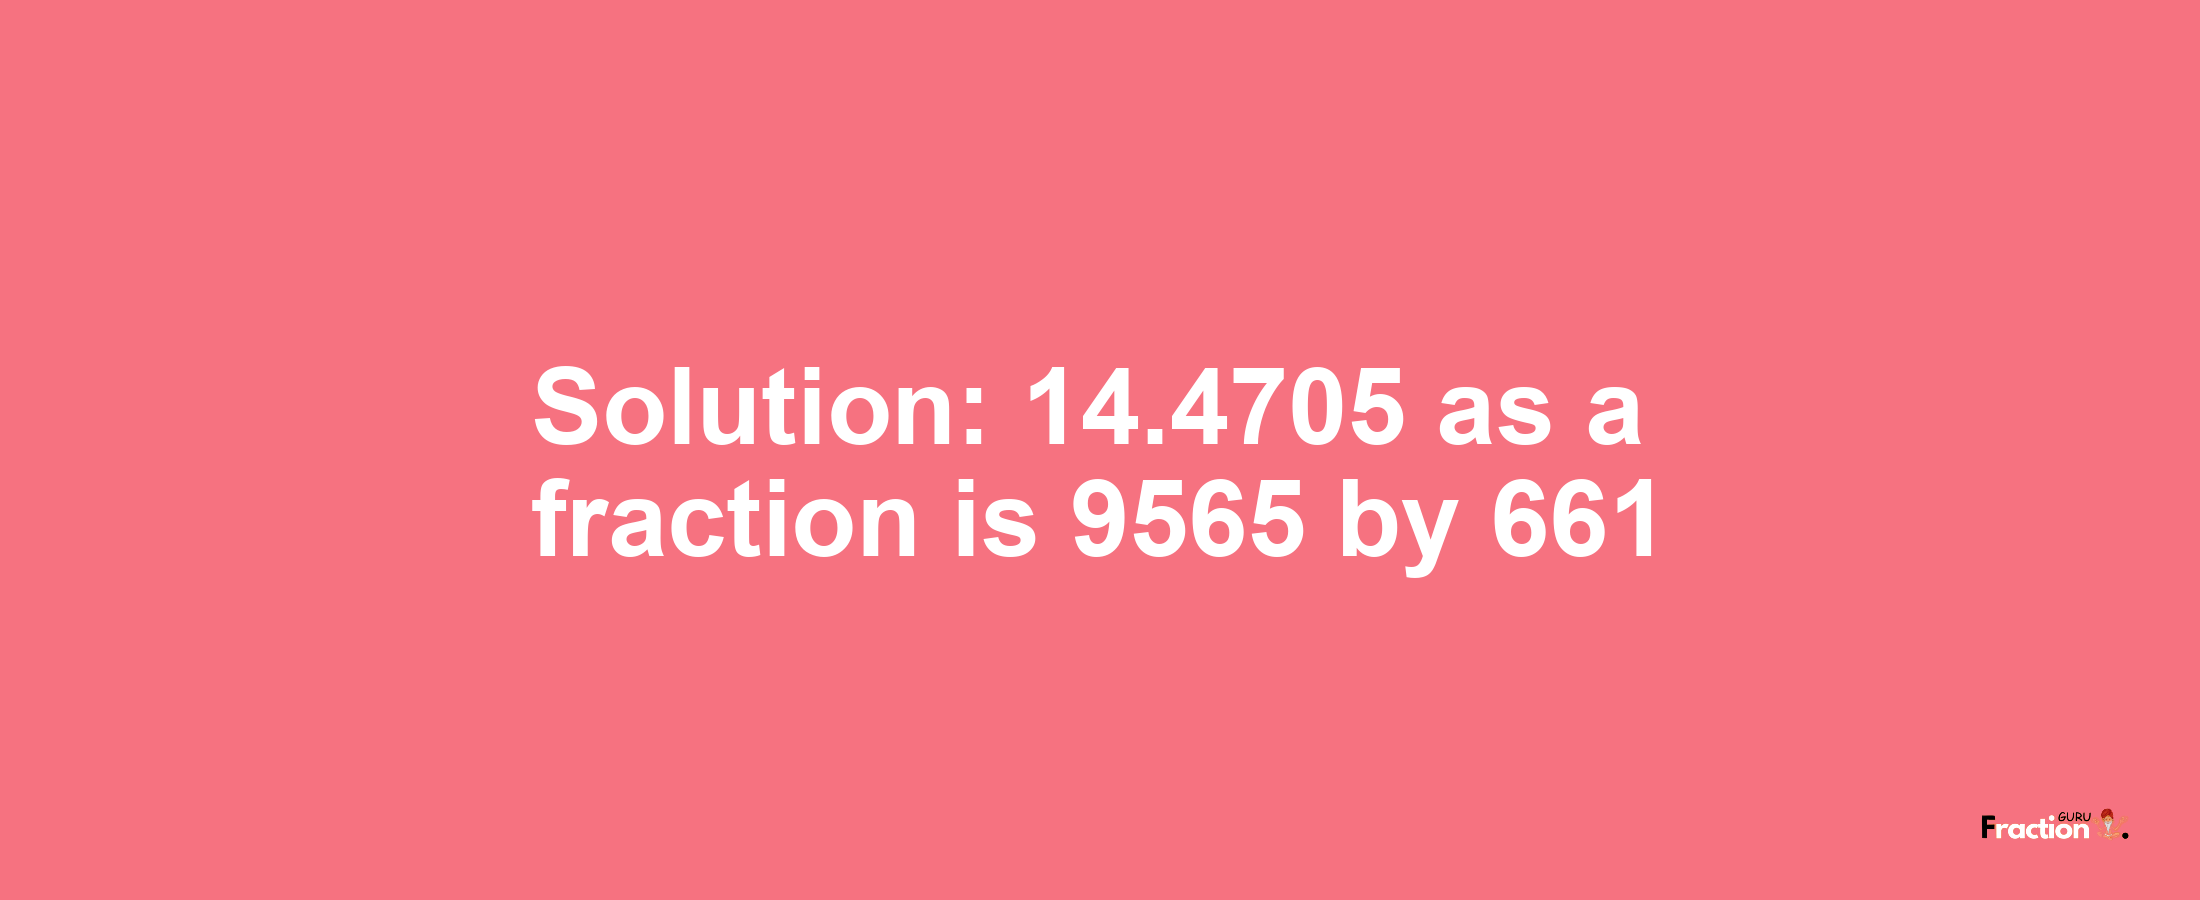 Solution:14.4705 as a fraction is 9565/661